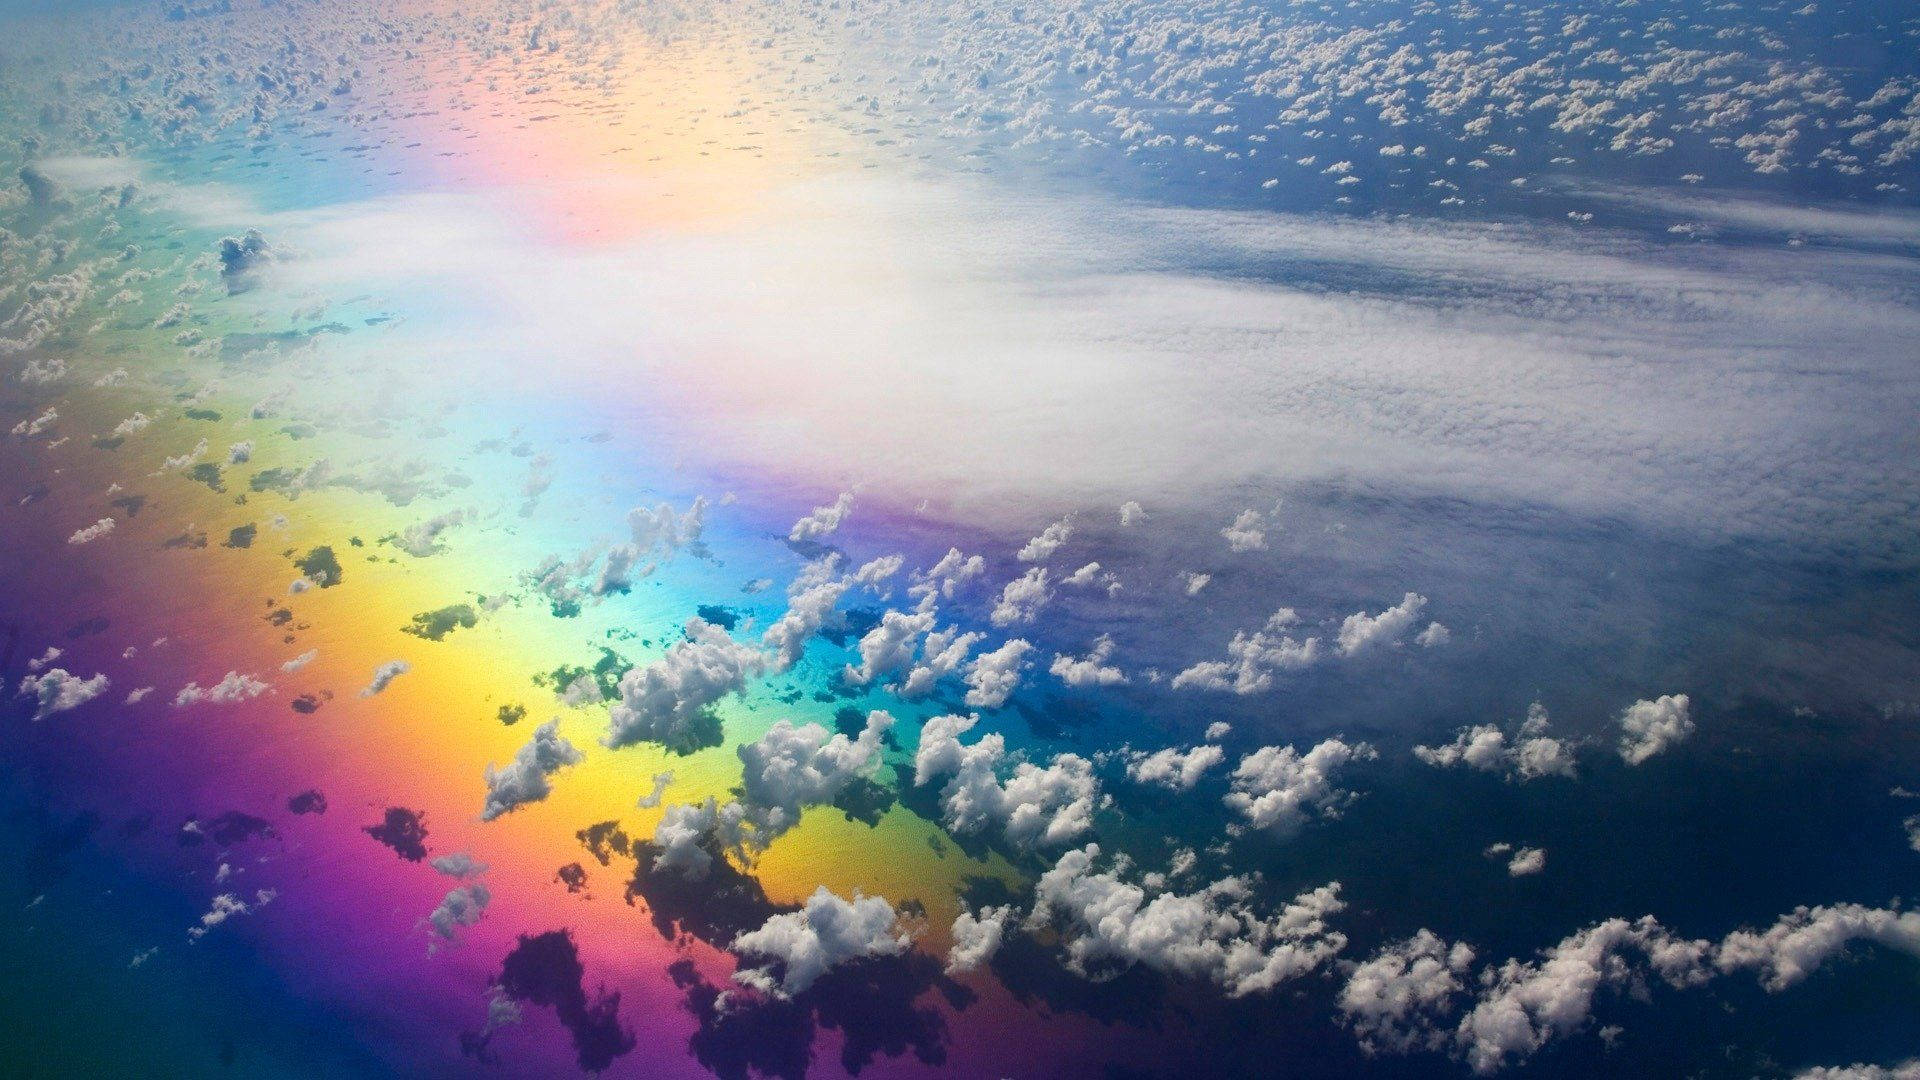 “A stunning rainbow appears in the sky, adding a magical touch to the day.” Wallpaper